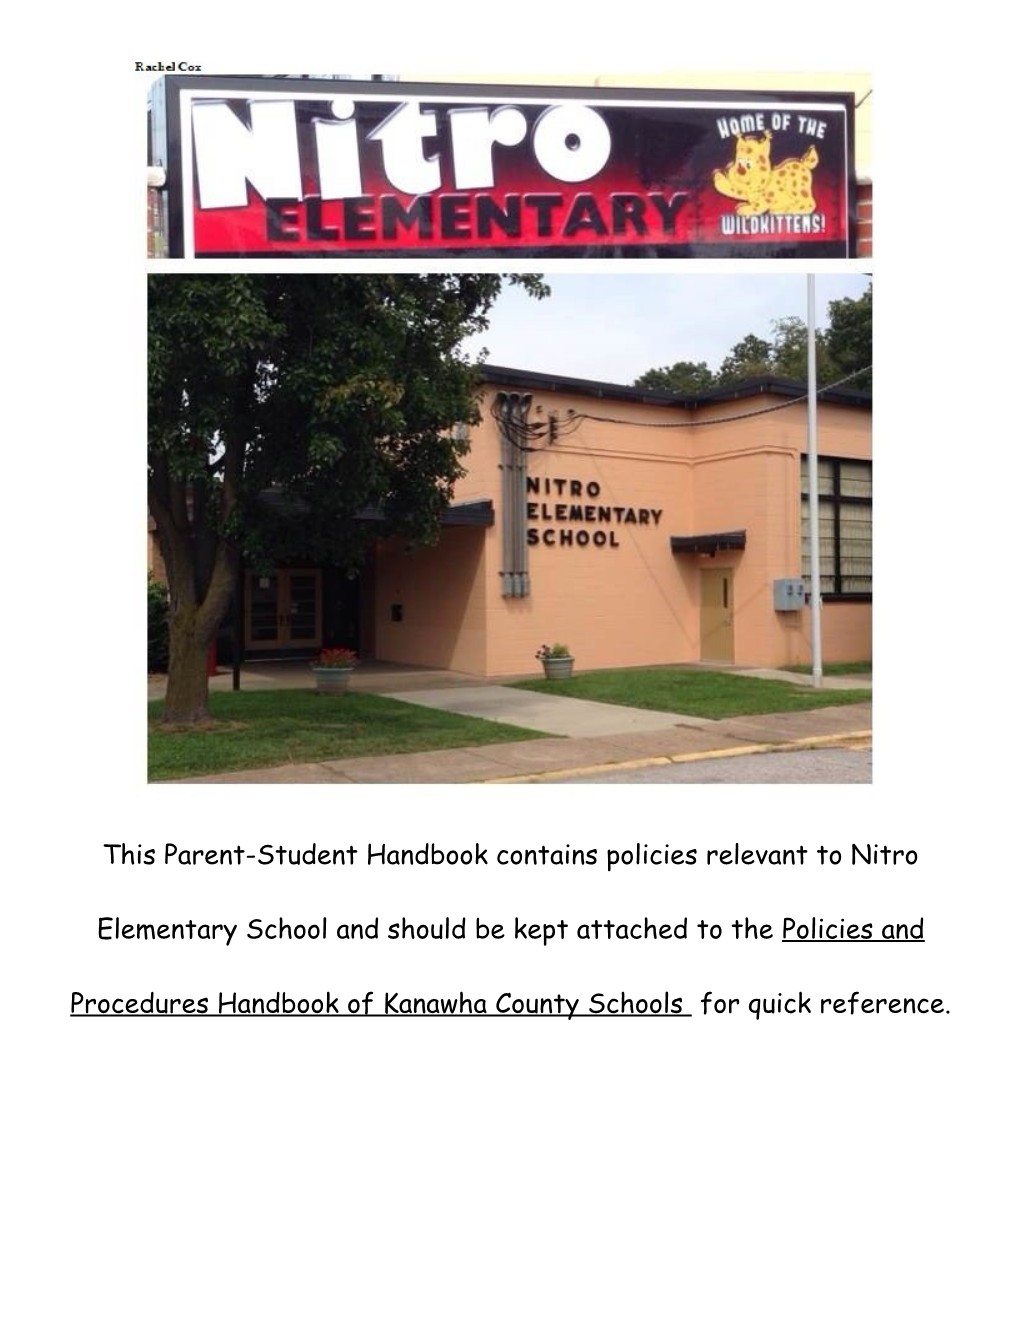 This Parent-Student Handbook Contains Policies Relevant to Nitro Elementary School And